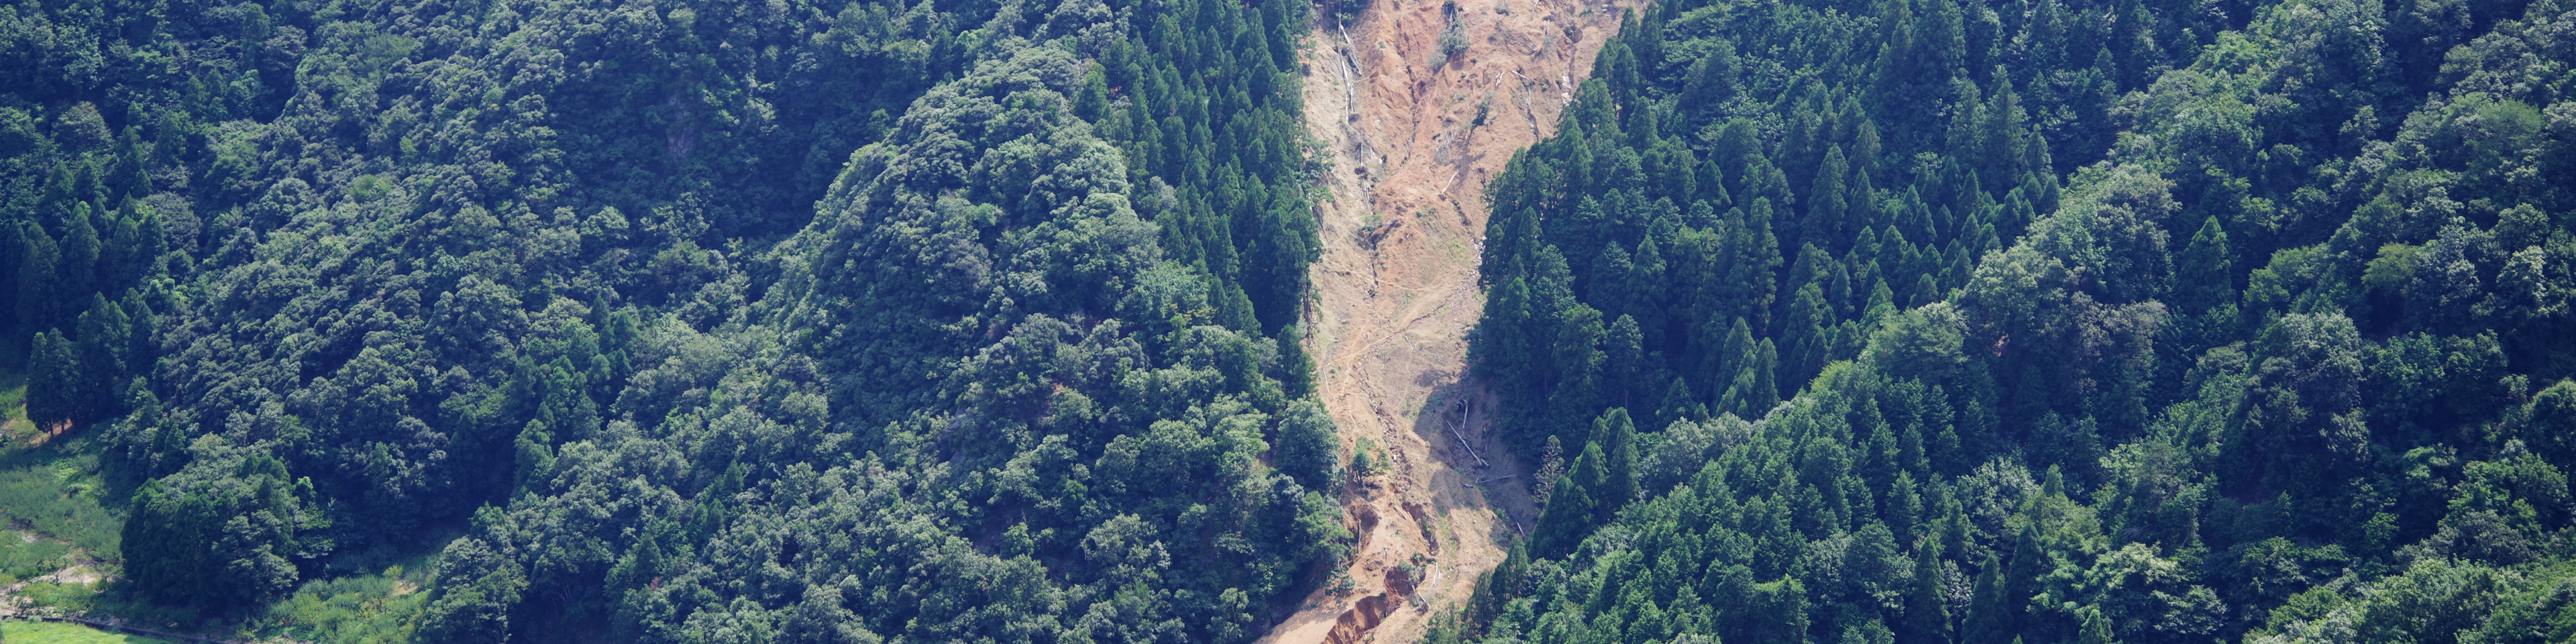 Mudslide in the mountain